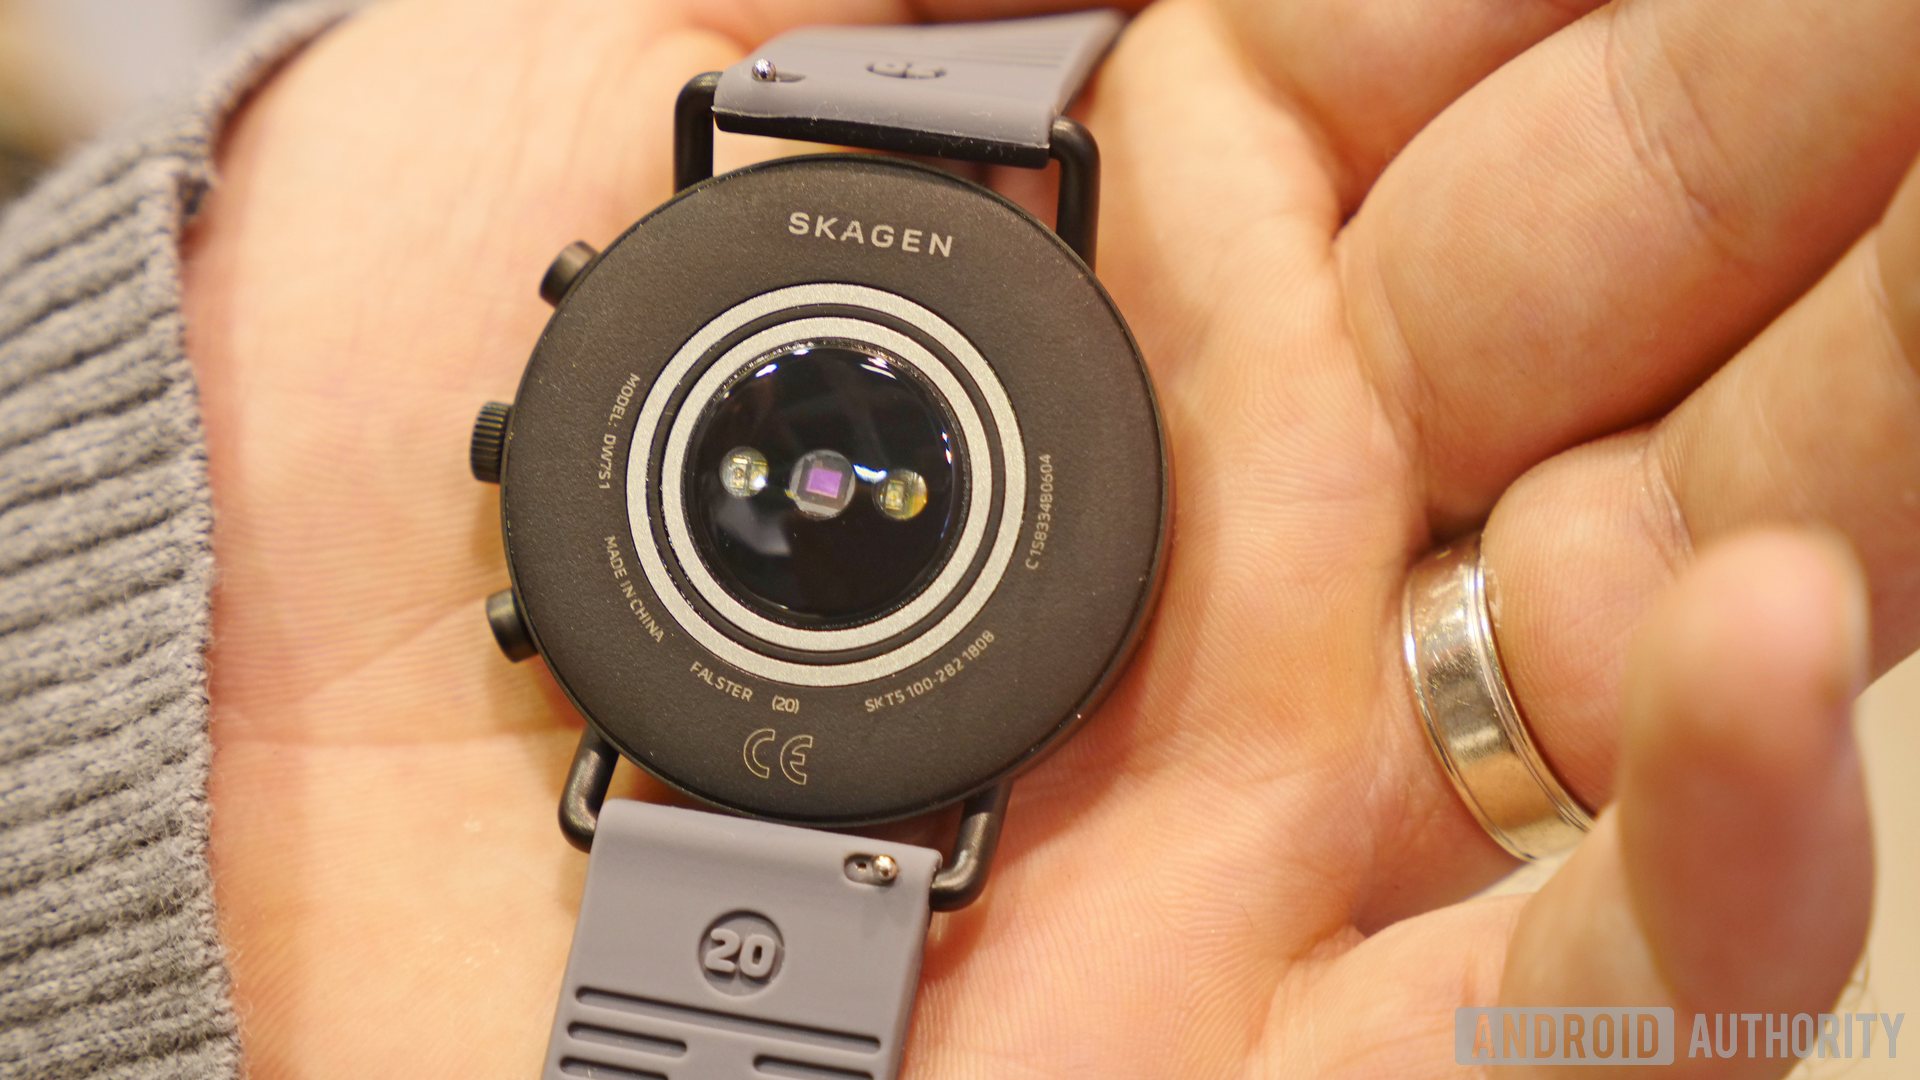 SKAGEN Falster 2 specs, price, release date, and everything else 